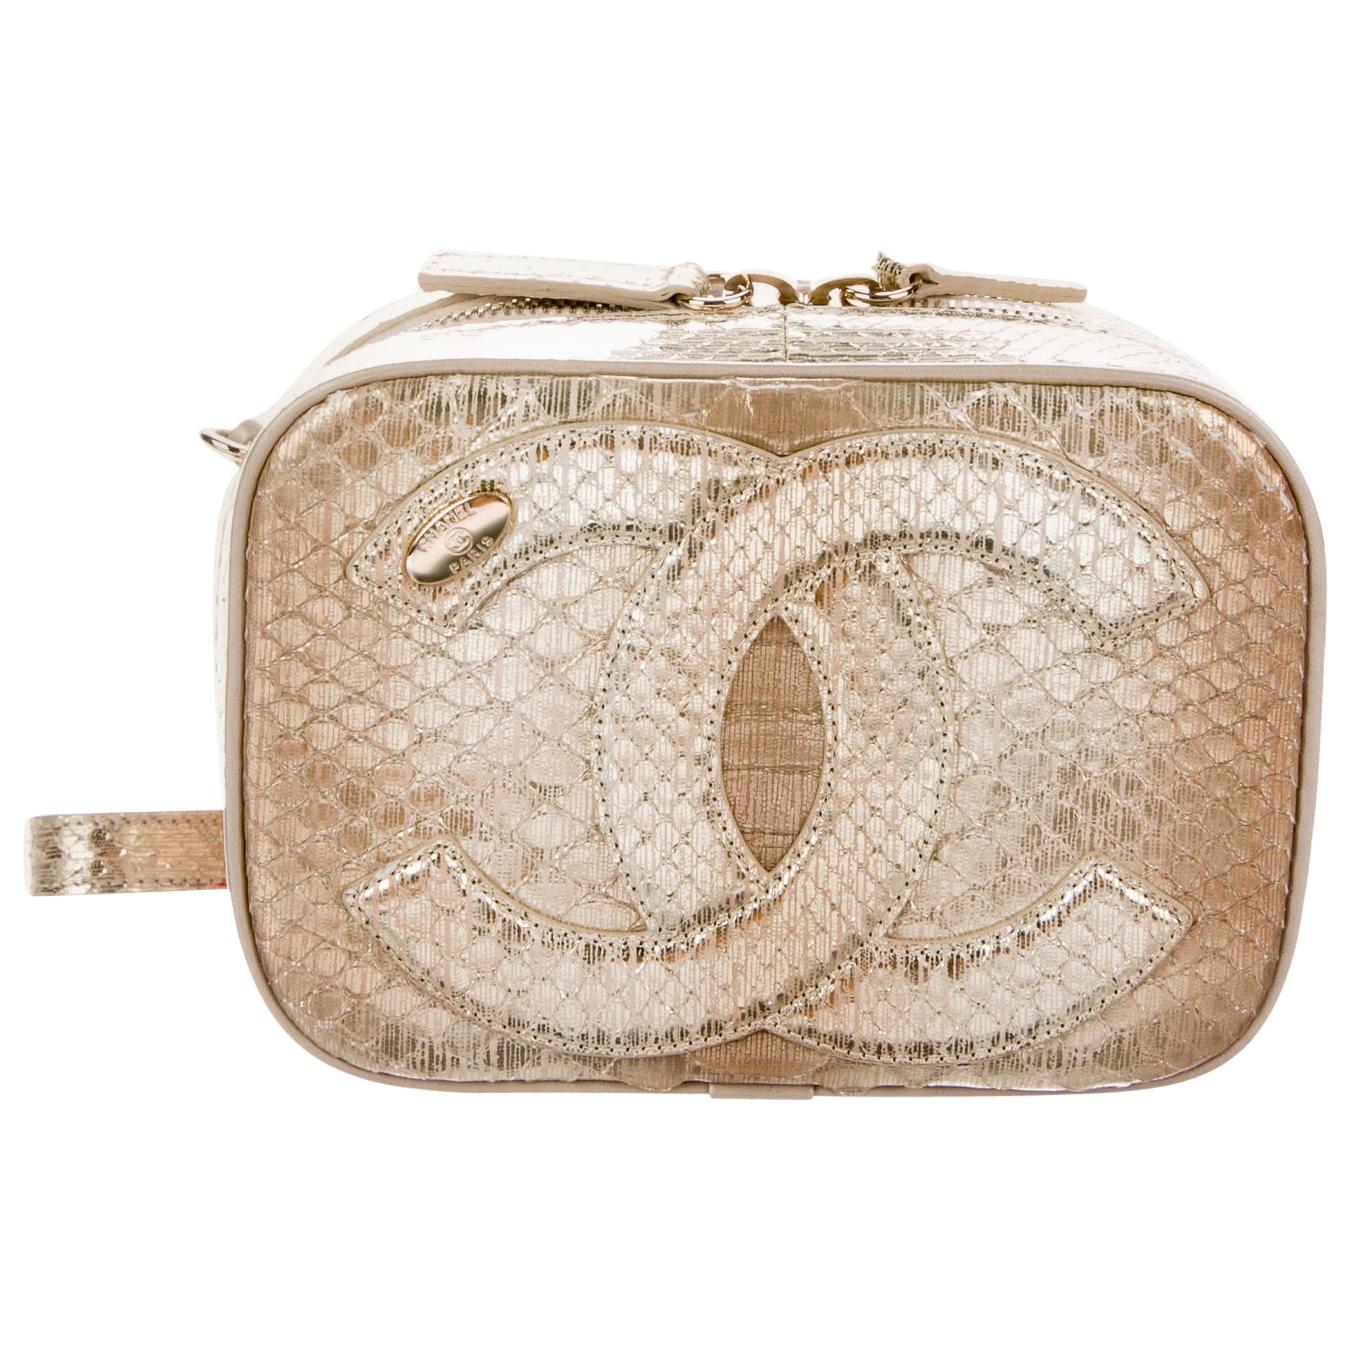 Chanel NEW Nude Gold Python Exotic Top Handle Satchel Shoulder Bag in Box 